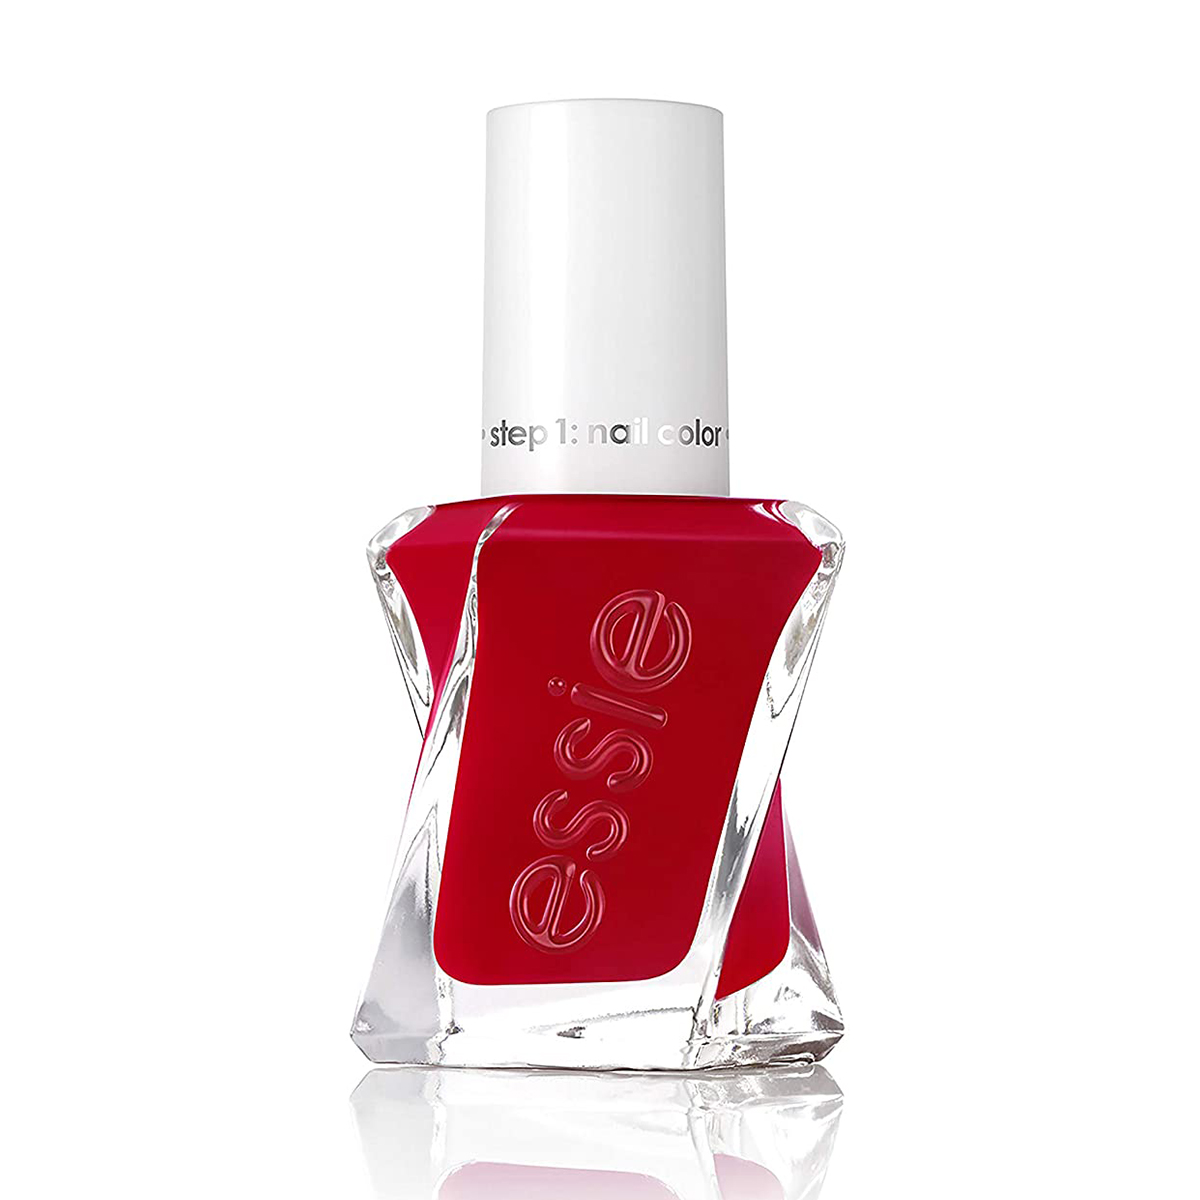  Essie Gel Couture Nagellack in Dame in Rot